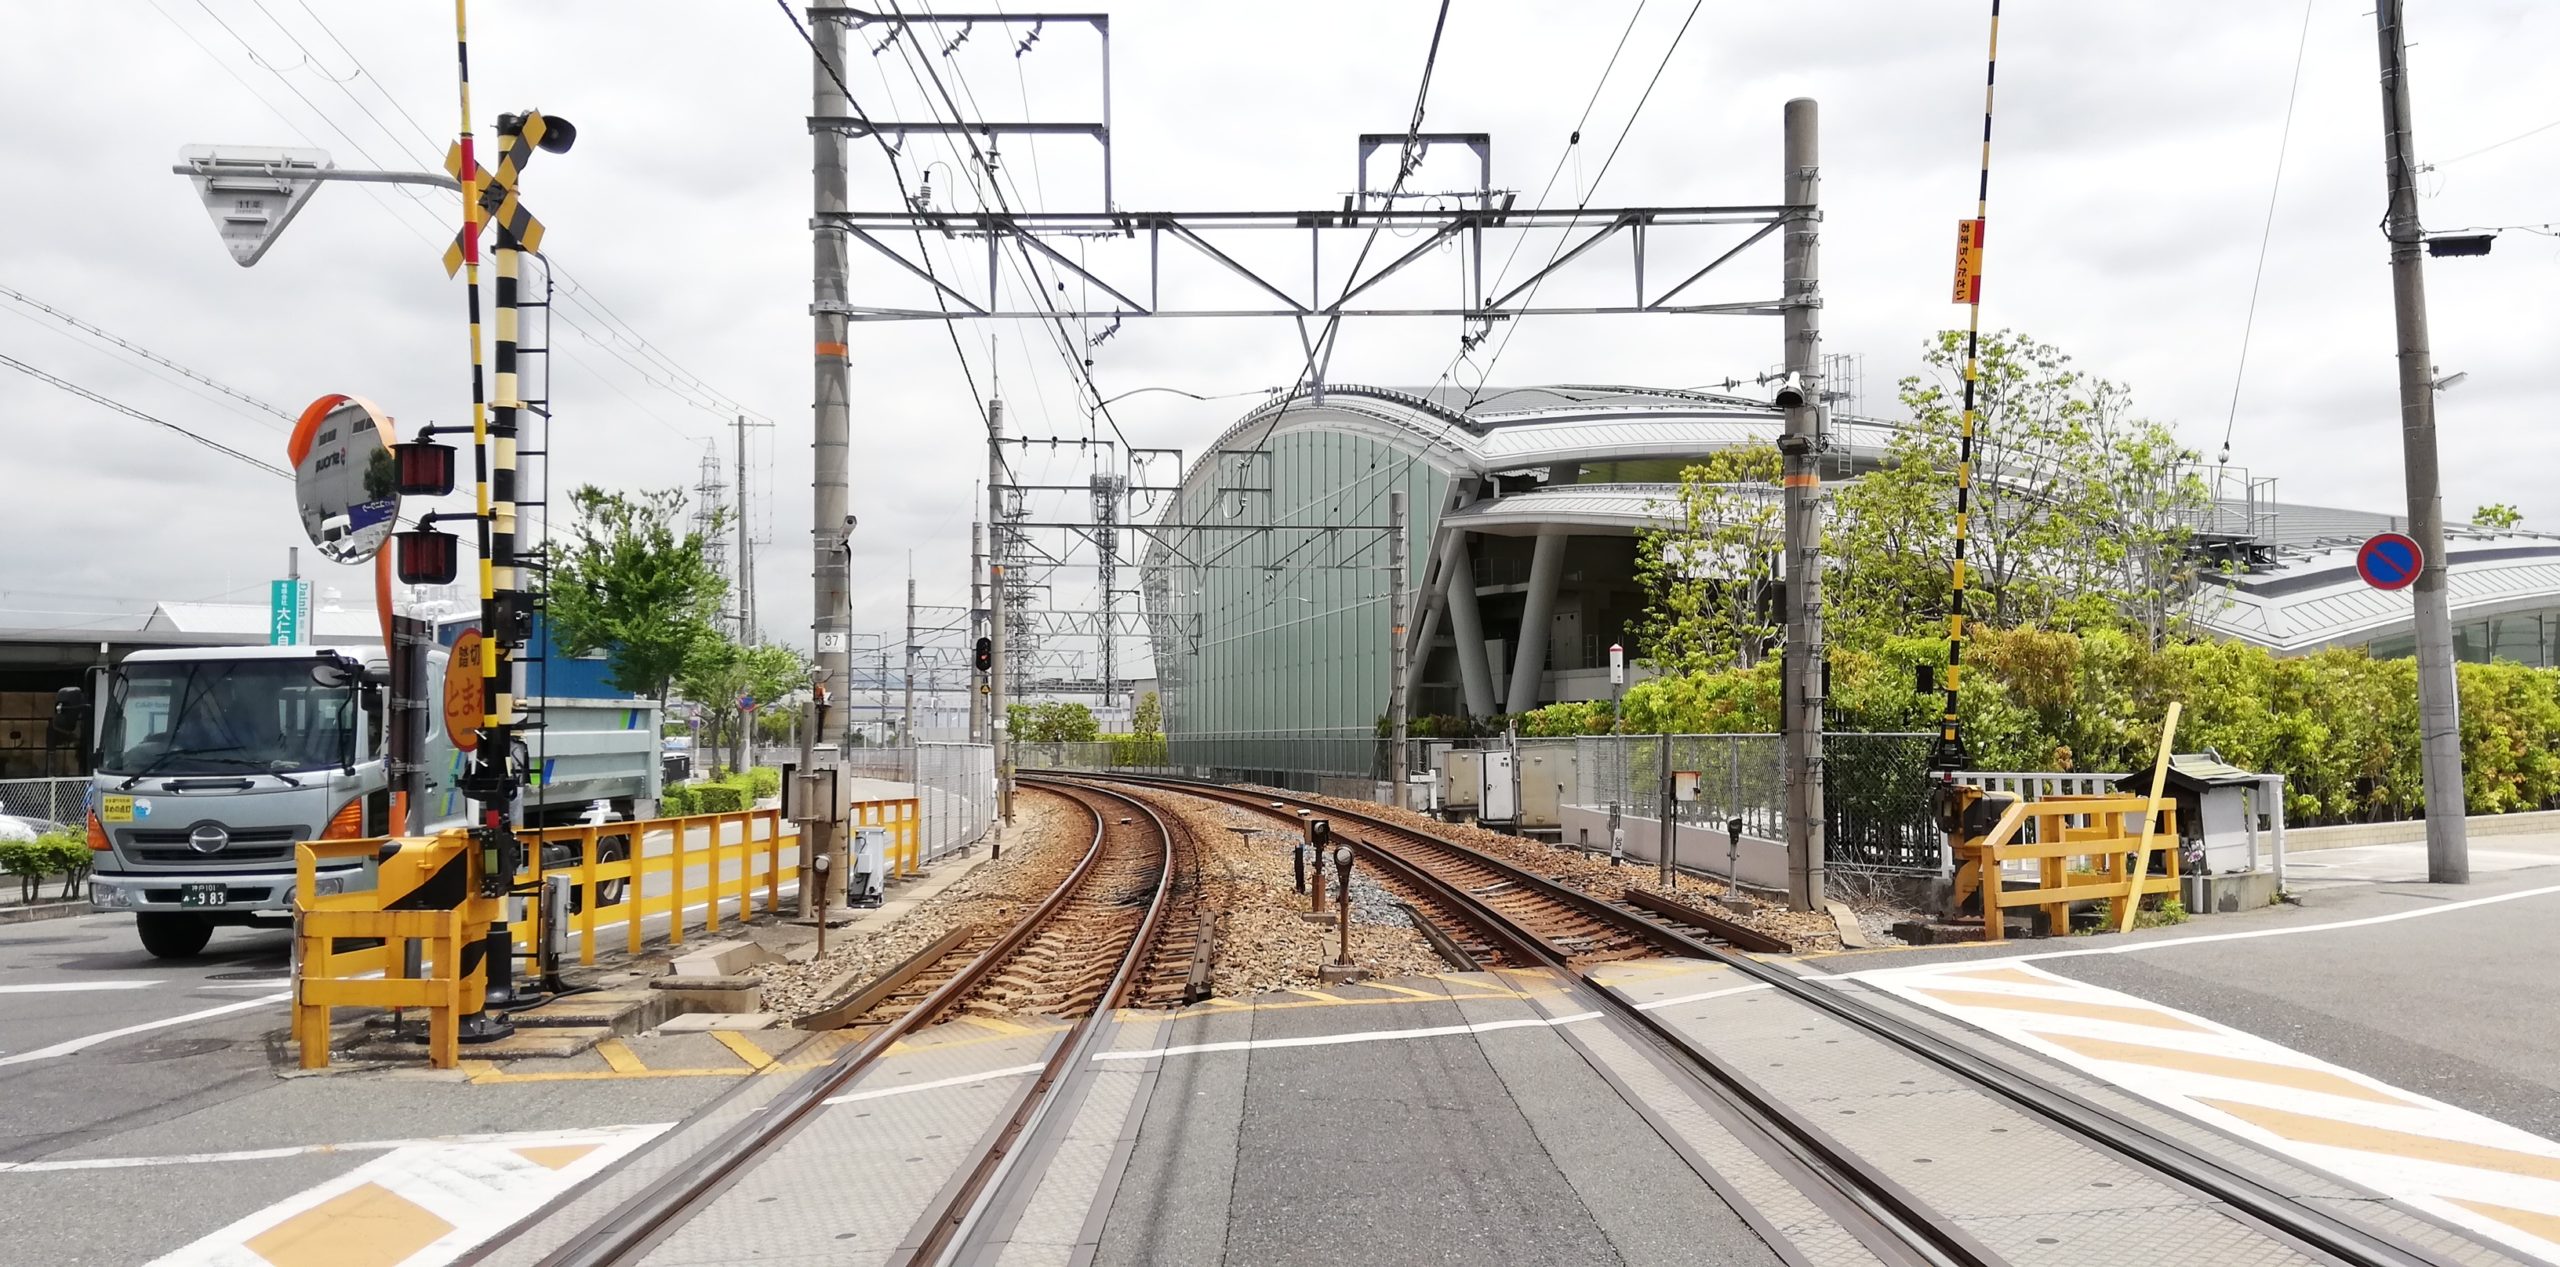 The derailment accident on the Fukuchiyama Line